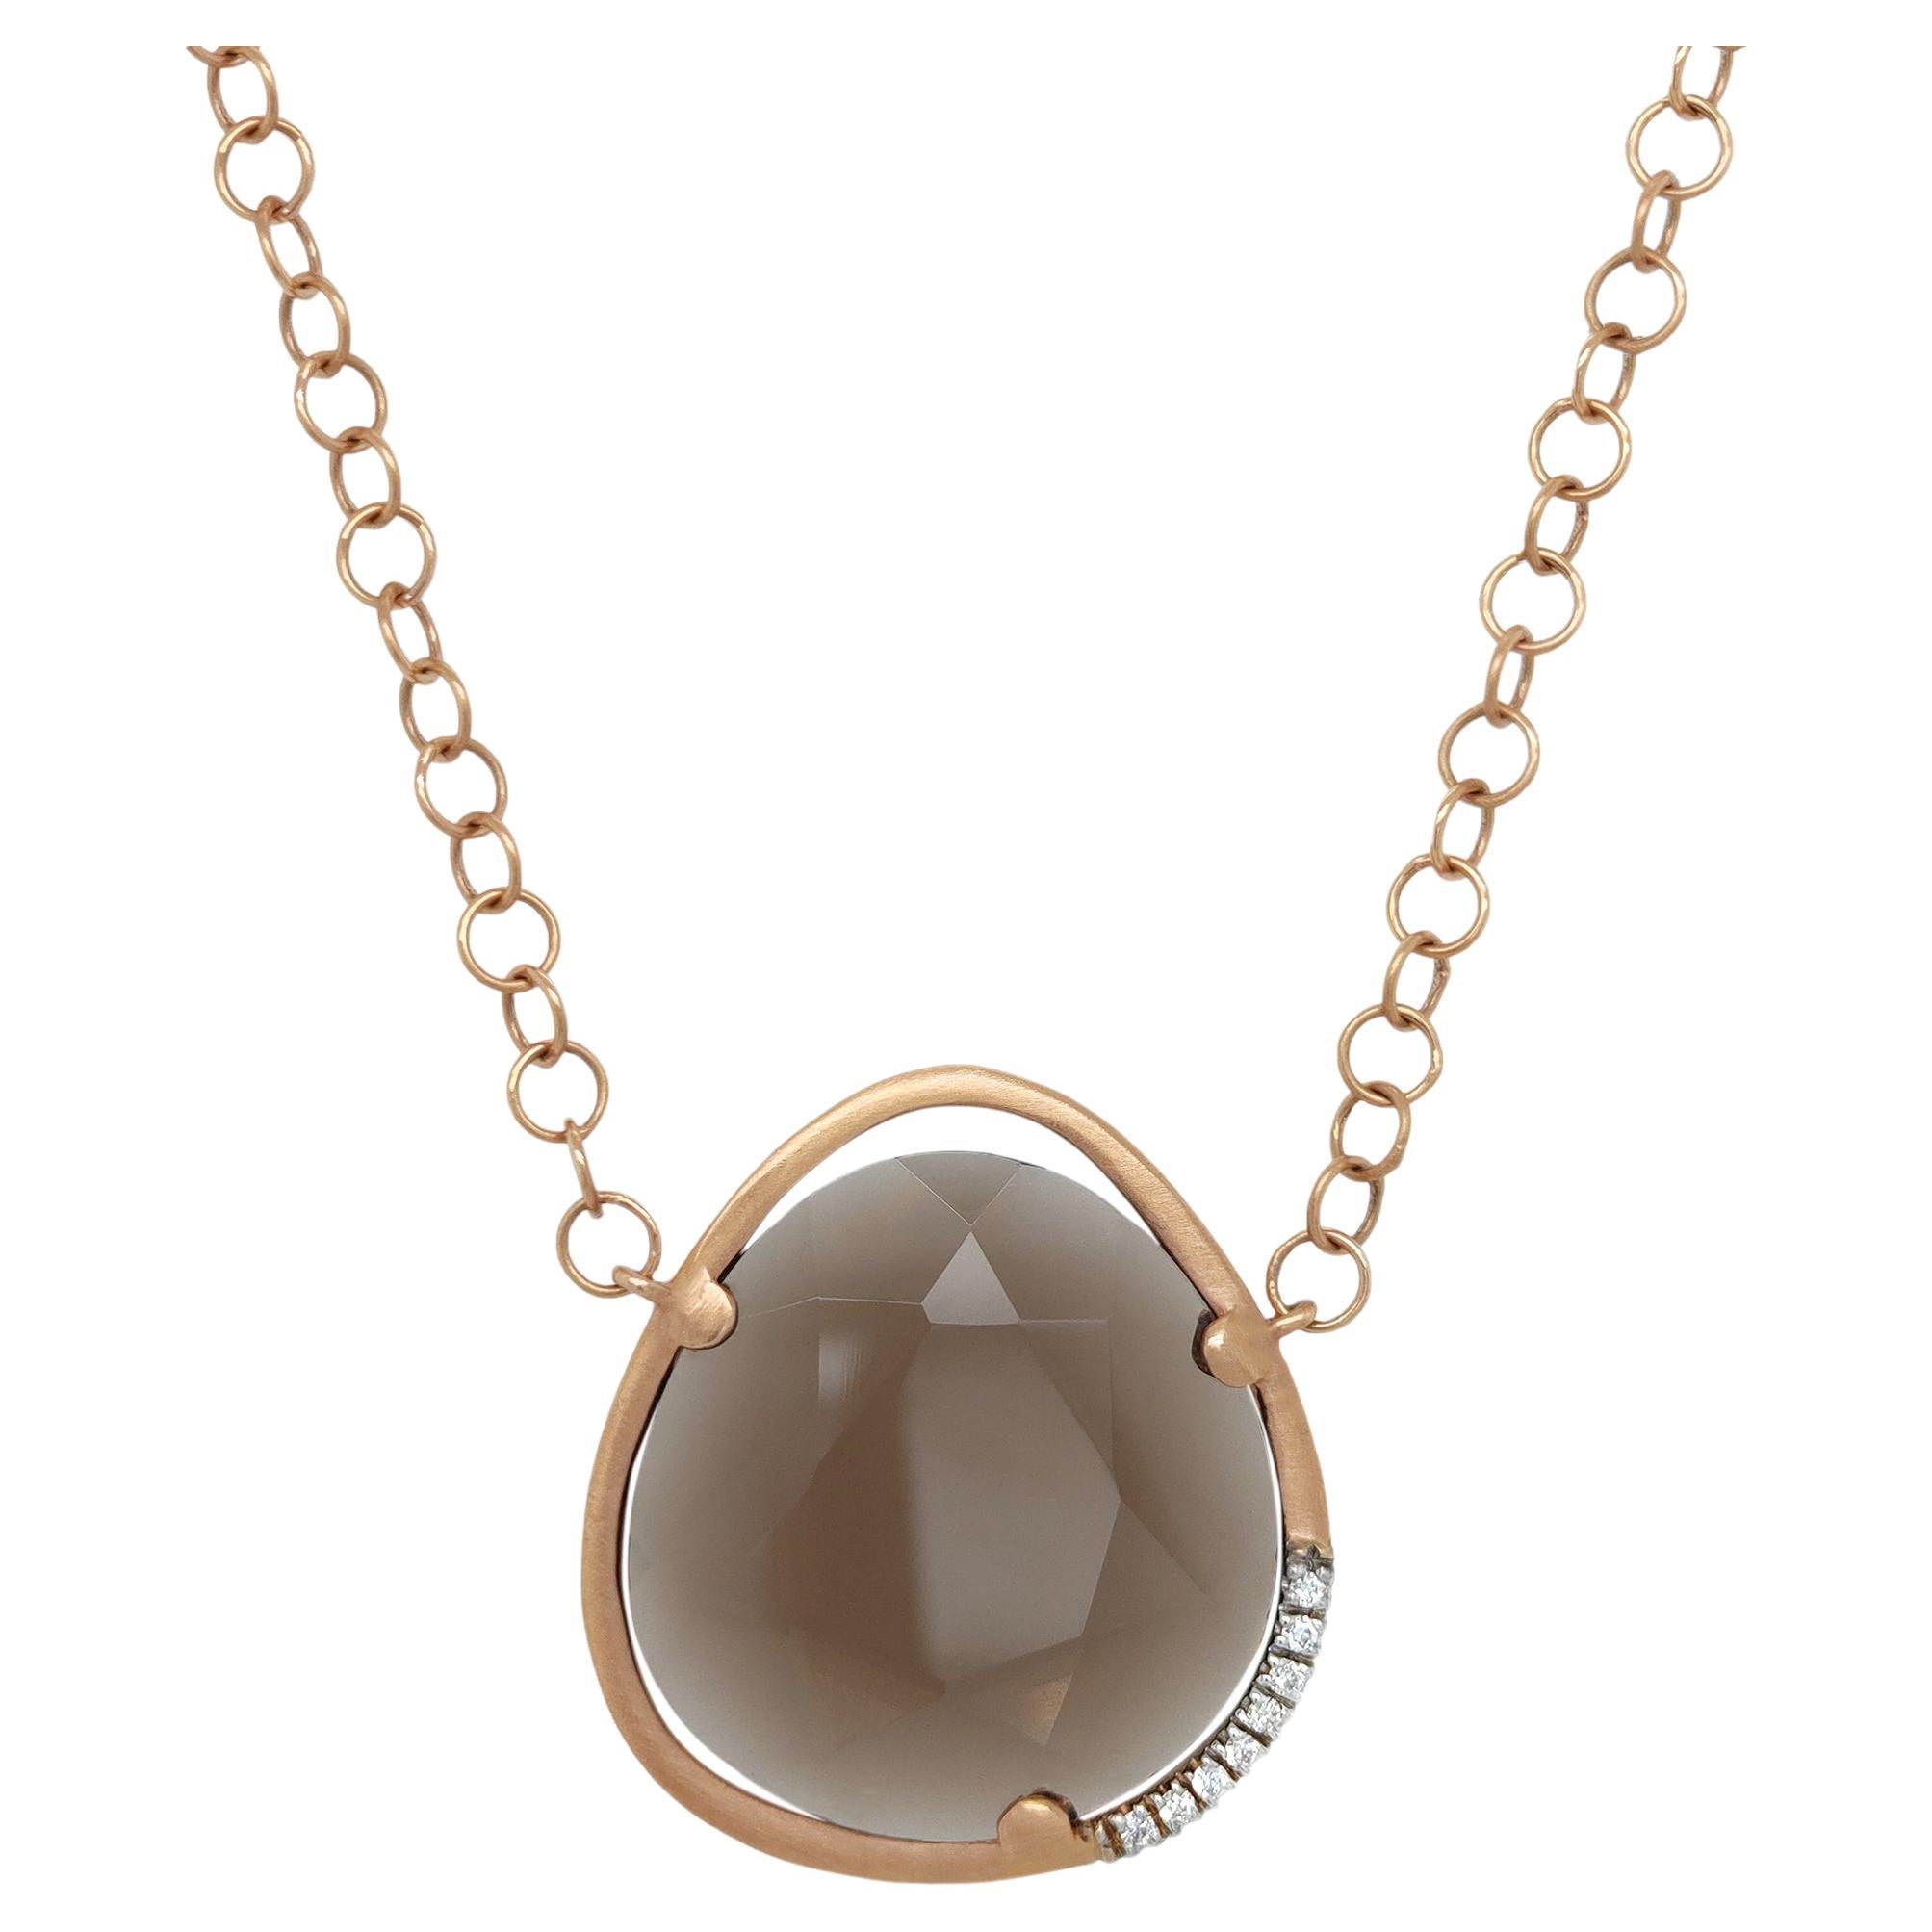 Necklace in 18kt gold chain and with a faceted smoky quartz & natural diamonds